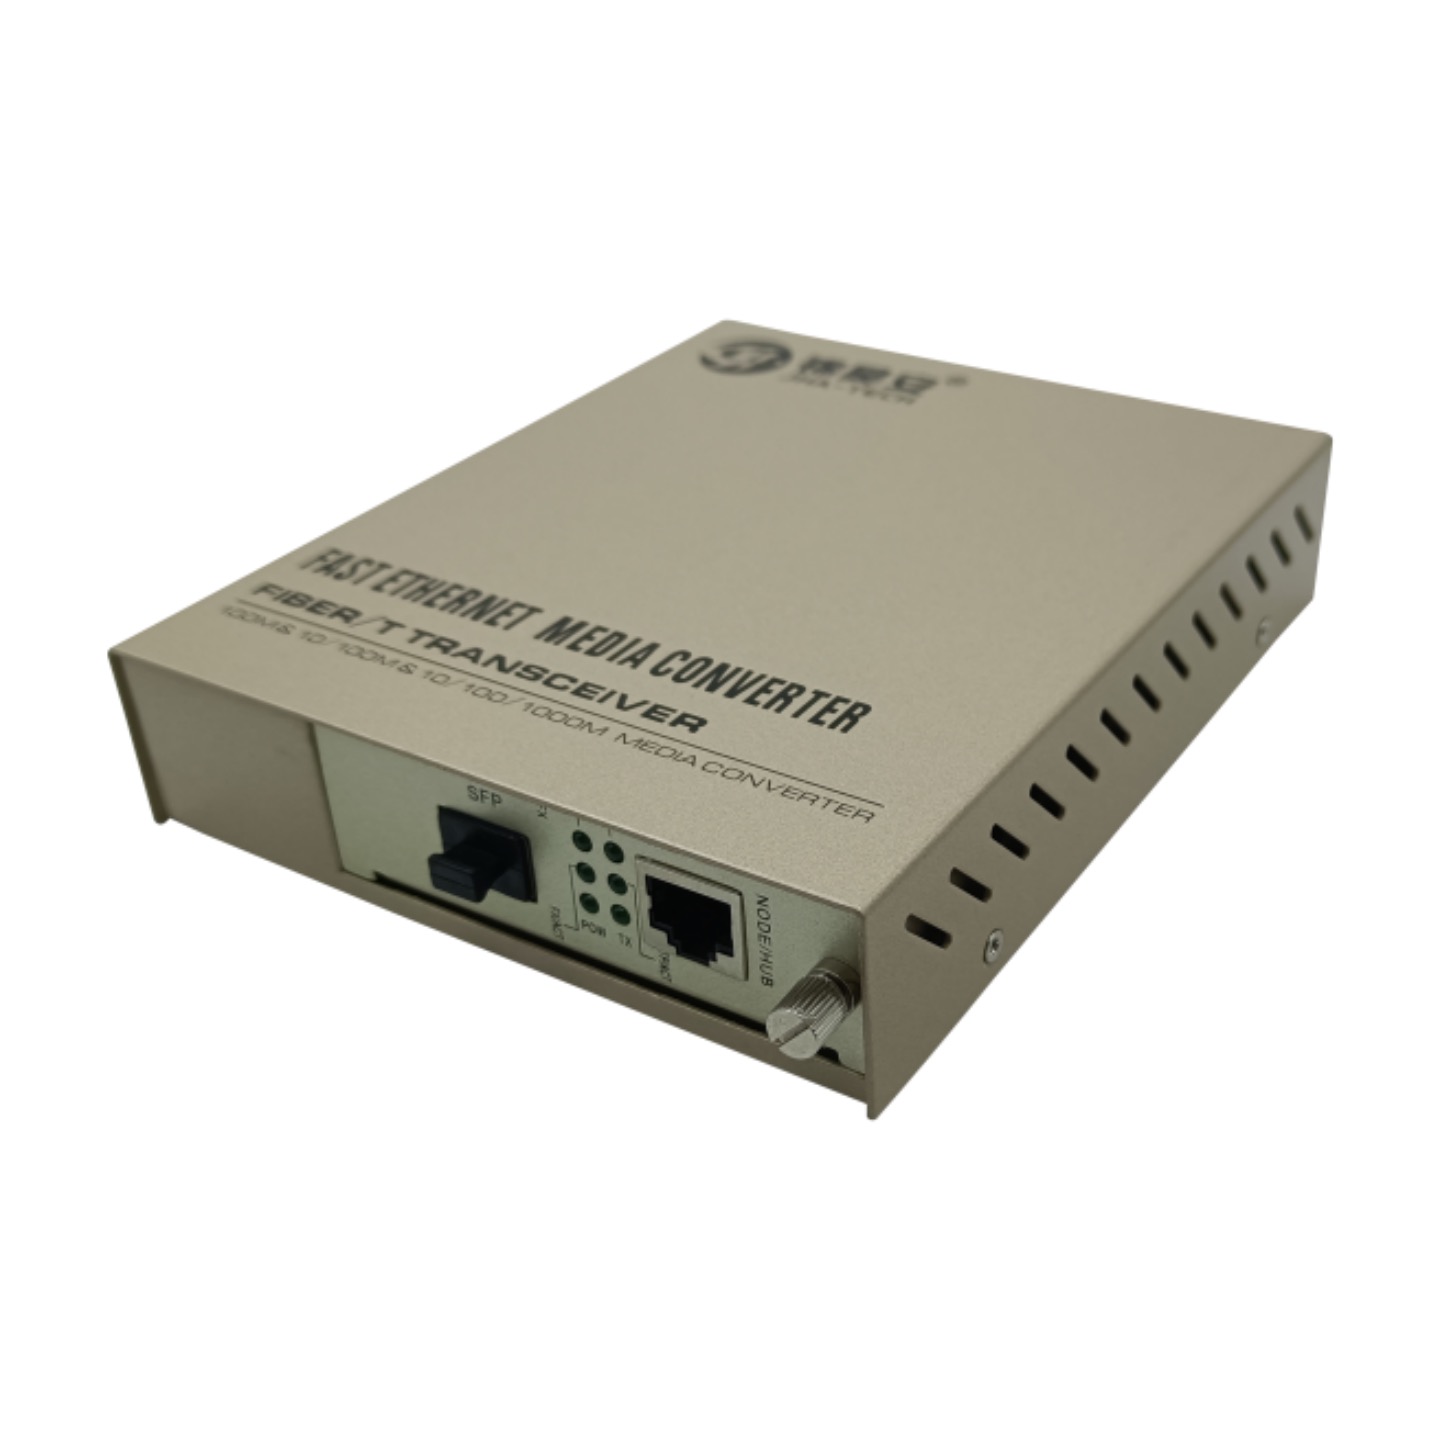 1 1000Base-X SFP Slot and 1 10/100/1000Base-T(X)  | Card type&Build-in Power Supply Fiber Media Converter JHA-GSCP11